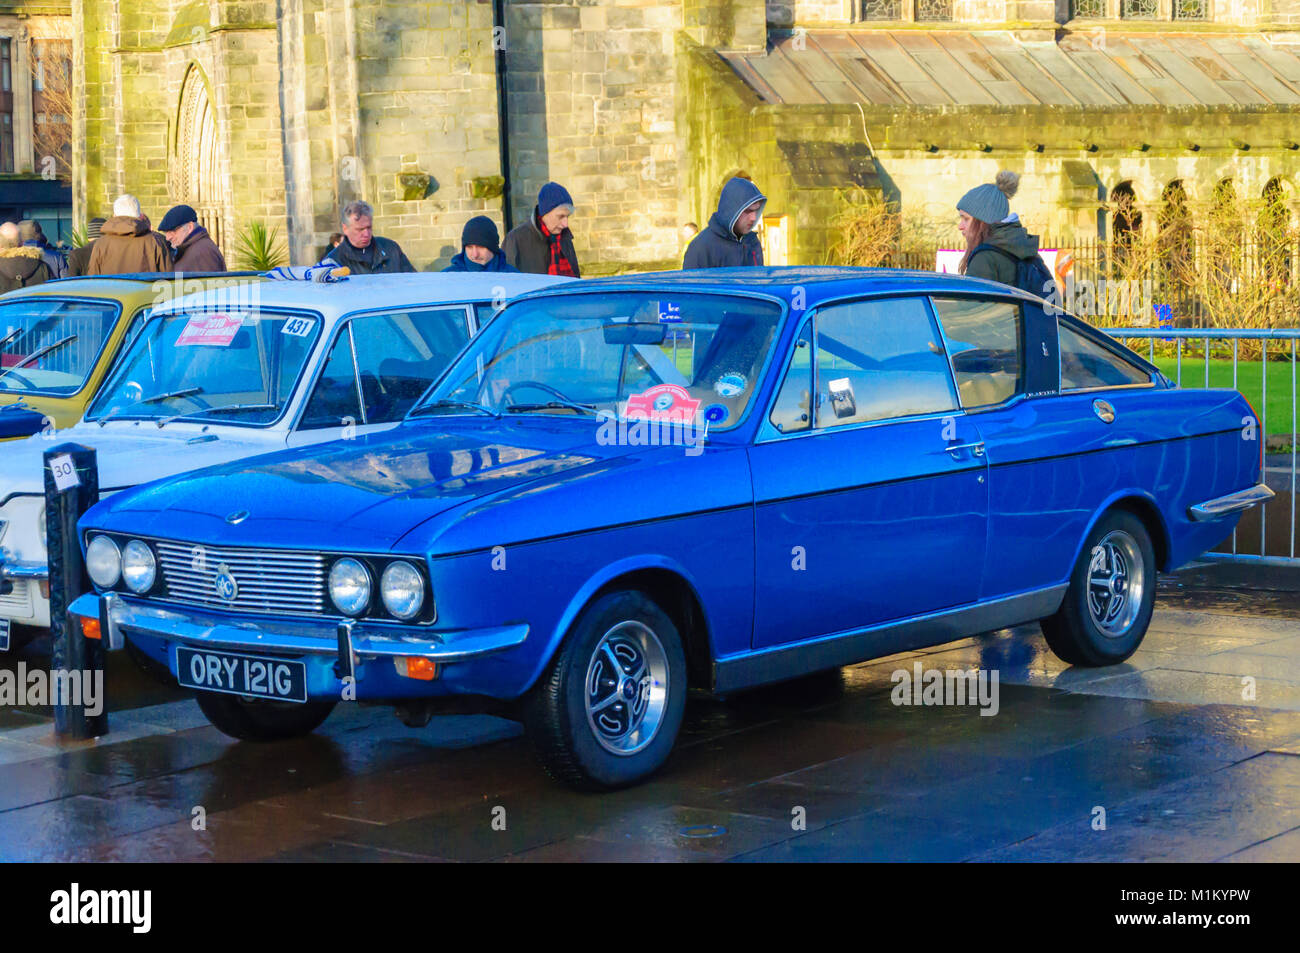 Paisley, Scotland, UK. 31st January 2018: The side view of a blue Sunbeam Rapier car. The Monte Carlo Rally starts at Paisley Abbey. This year sees the 21st  Historique event and the 3rd Classique event. Both events are staged by the Automobile Club de Monaco  and take place on open public roads. The distance to Monte Carlo is 1270 miles. Credit: Skully/Alamy Live News Stock Photo